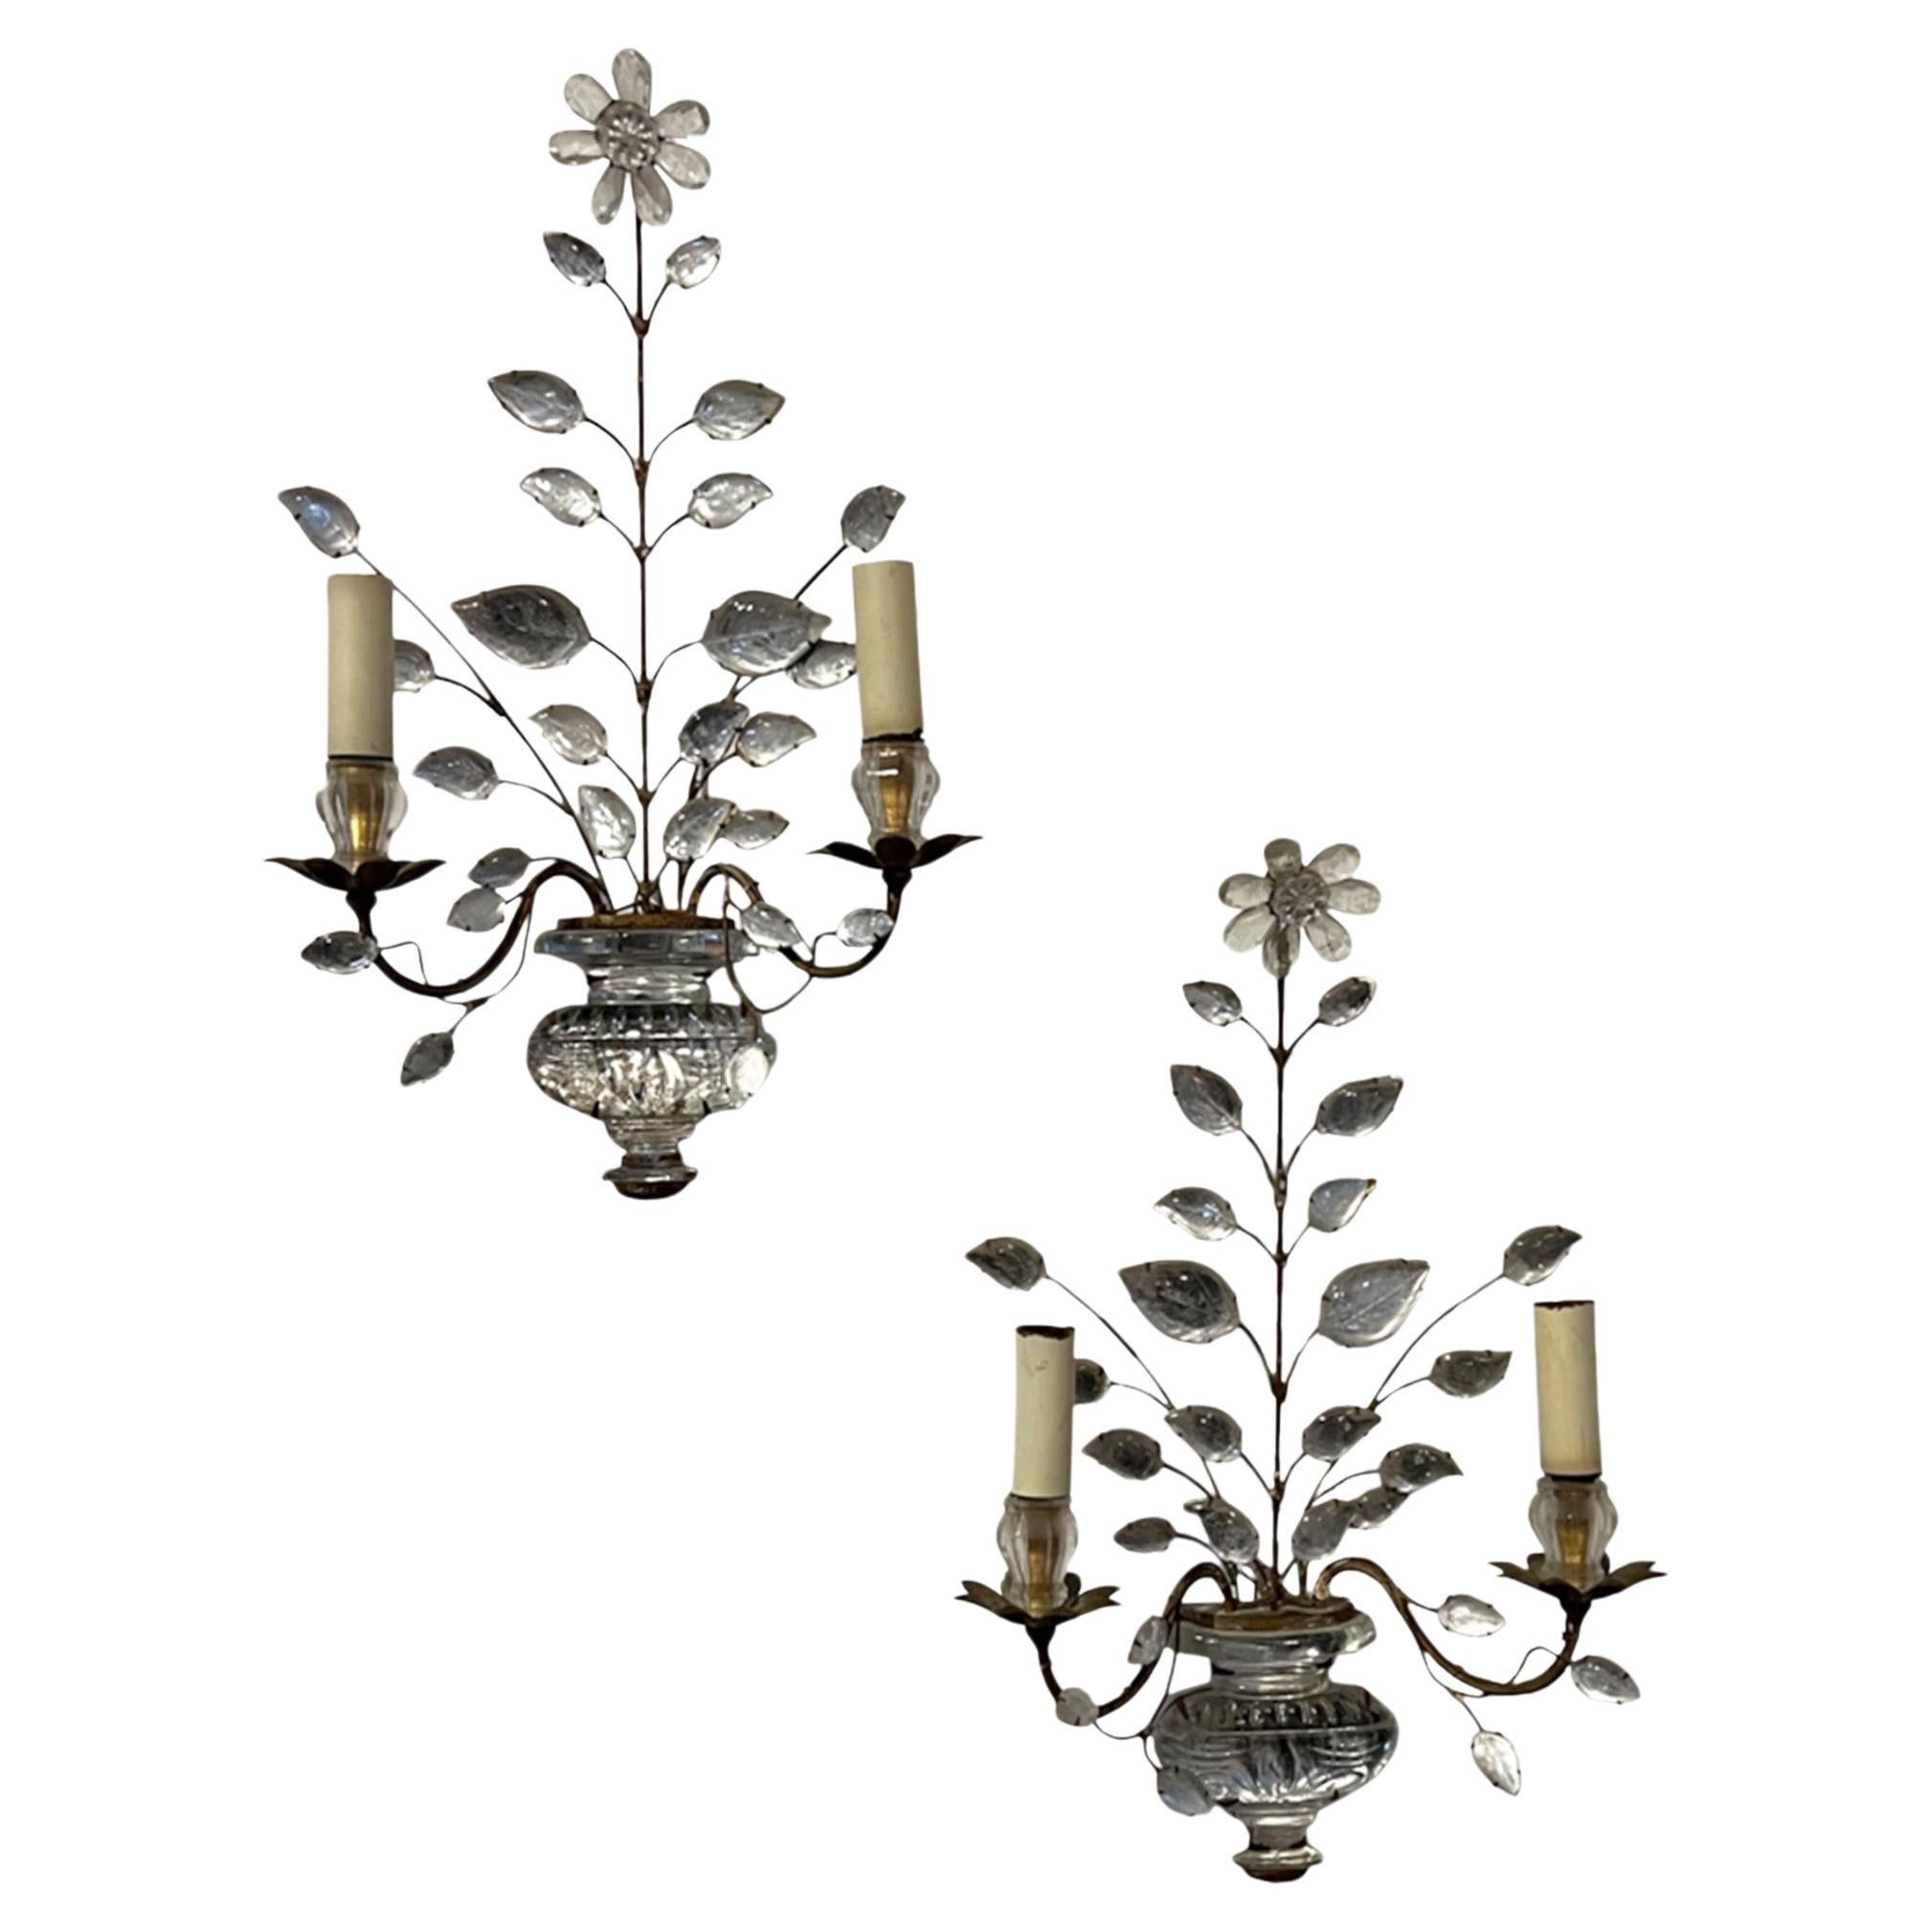 Pair of 1950s Maison Baguès Wall Sconces with Flowers and Urns